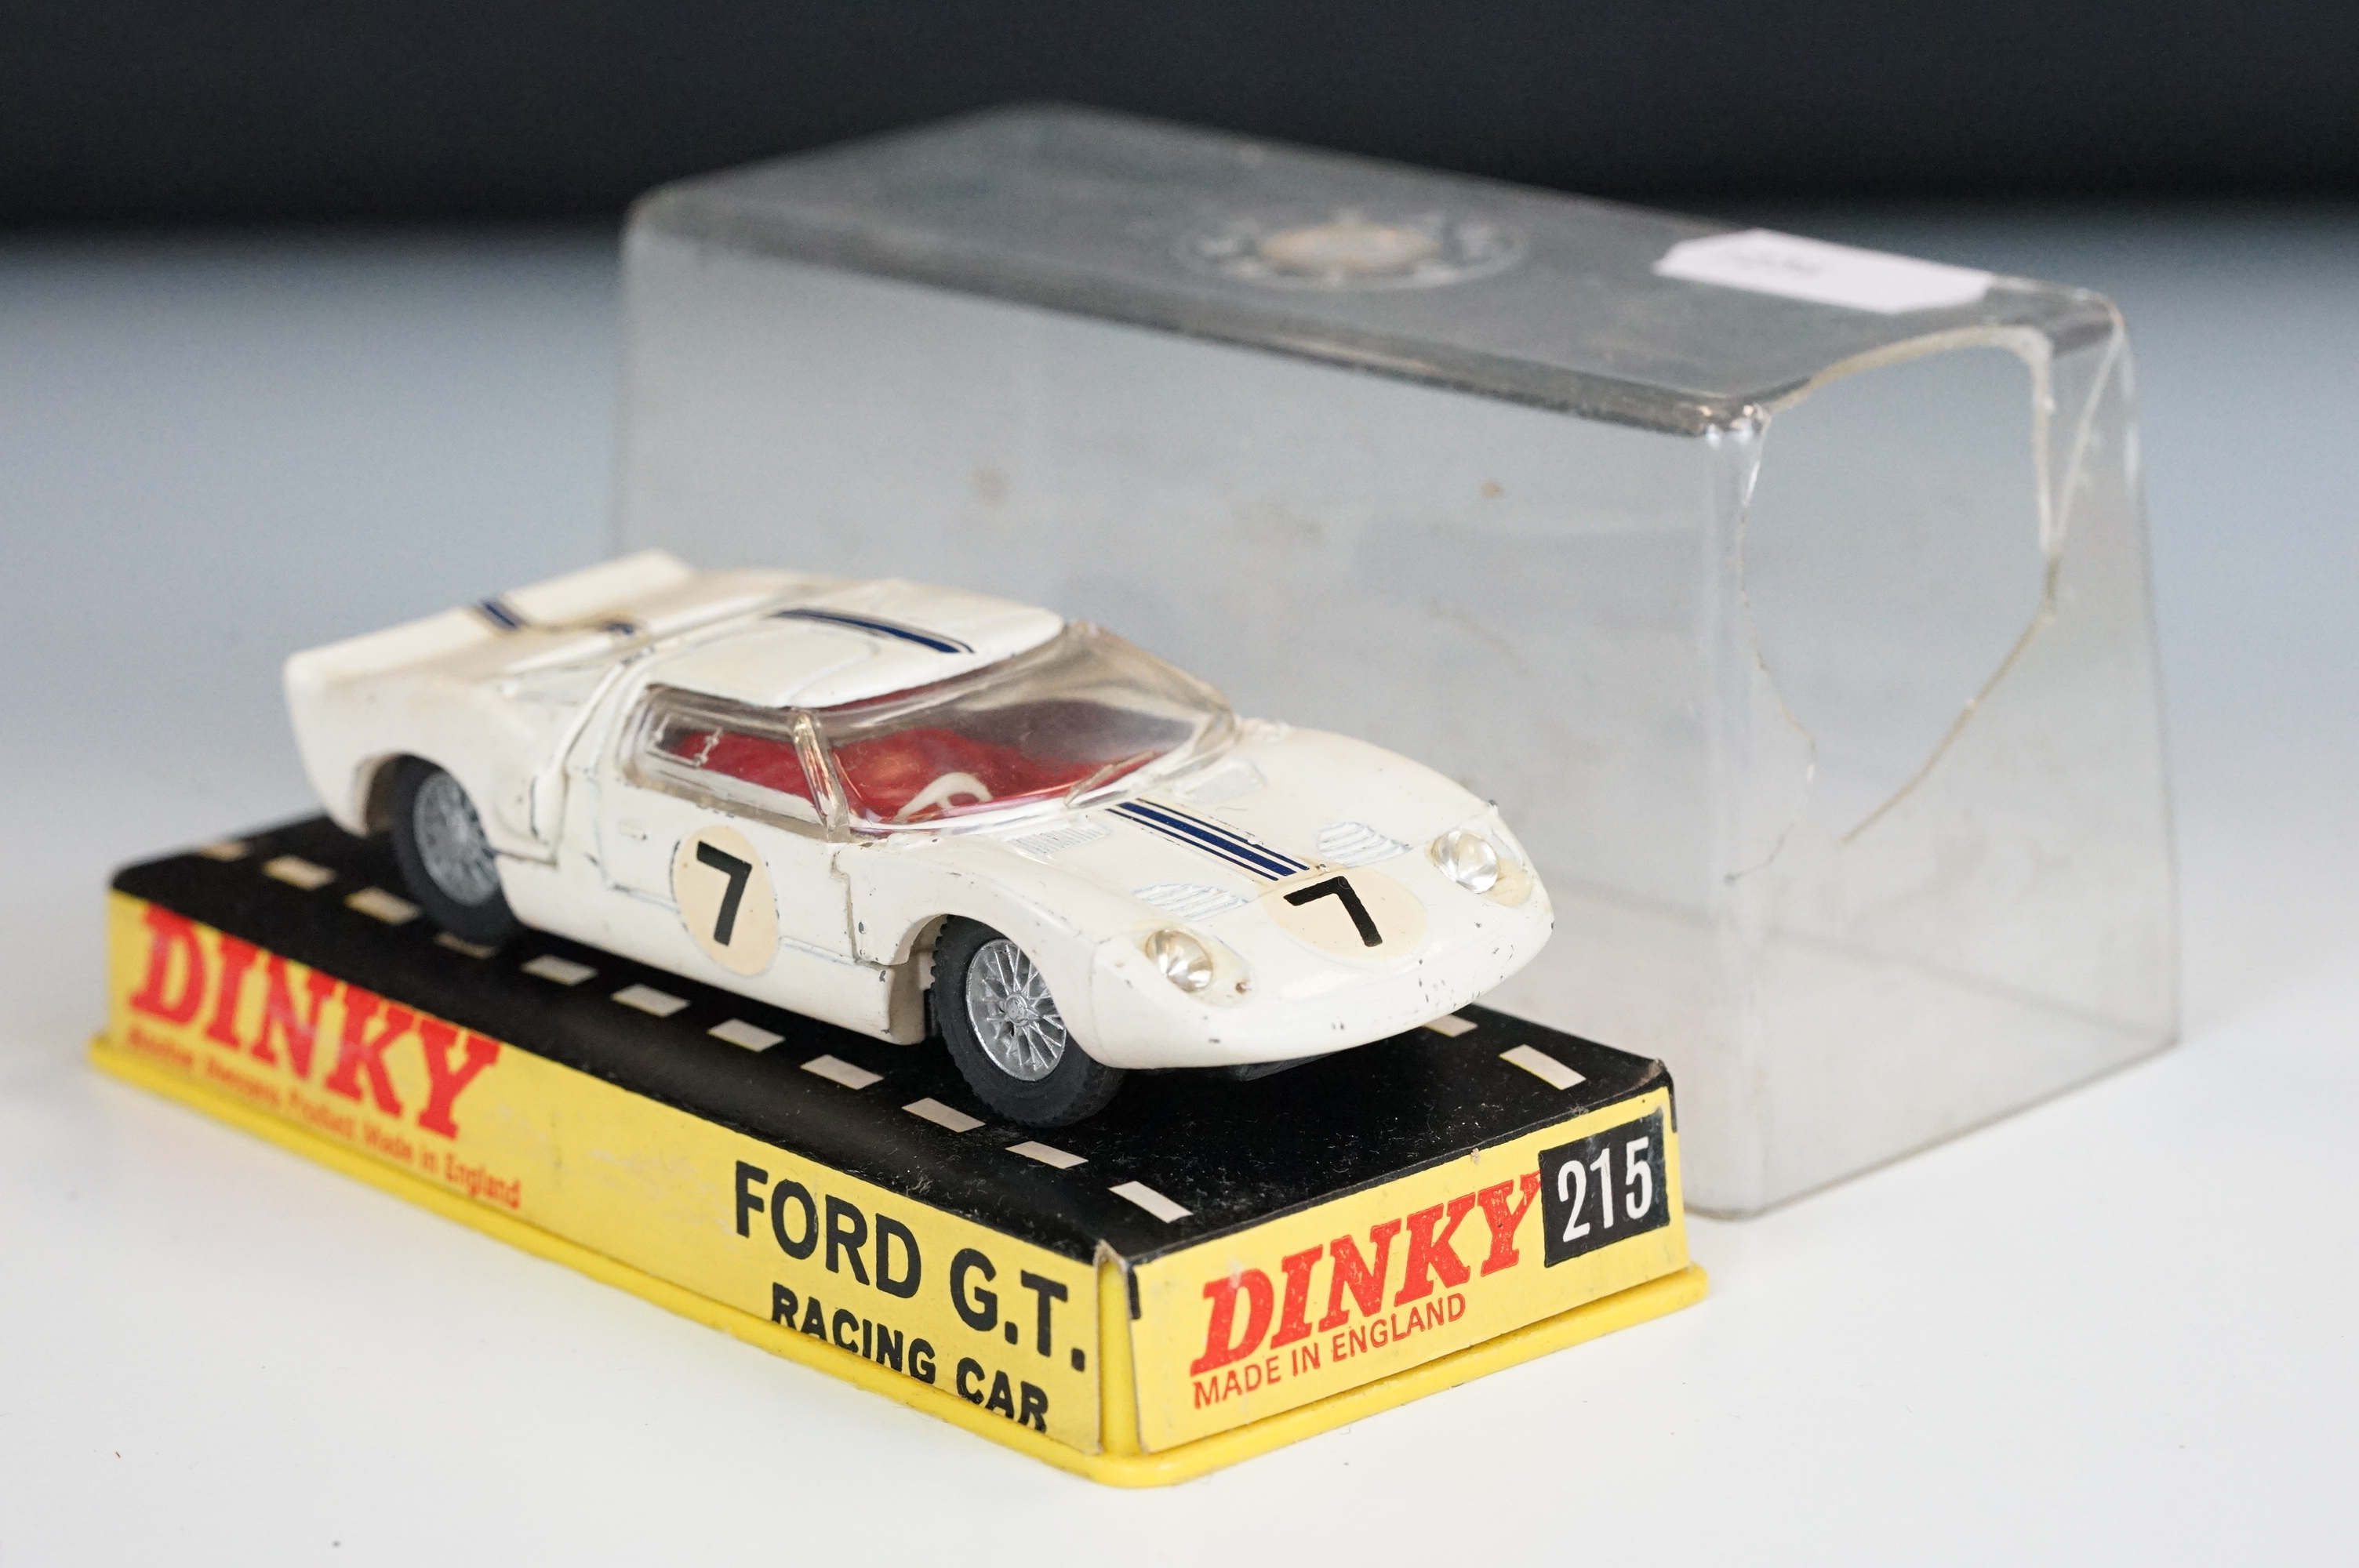 Two cased Dinky diecast models to include 164 Mk 4 Ford Zodiac & 215 Ford G.T. Racing Car (diecast - Image 15 of 23